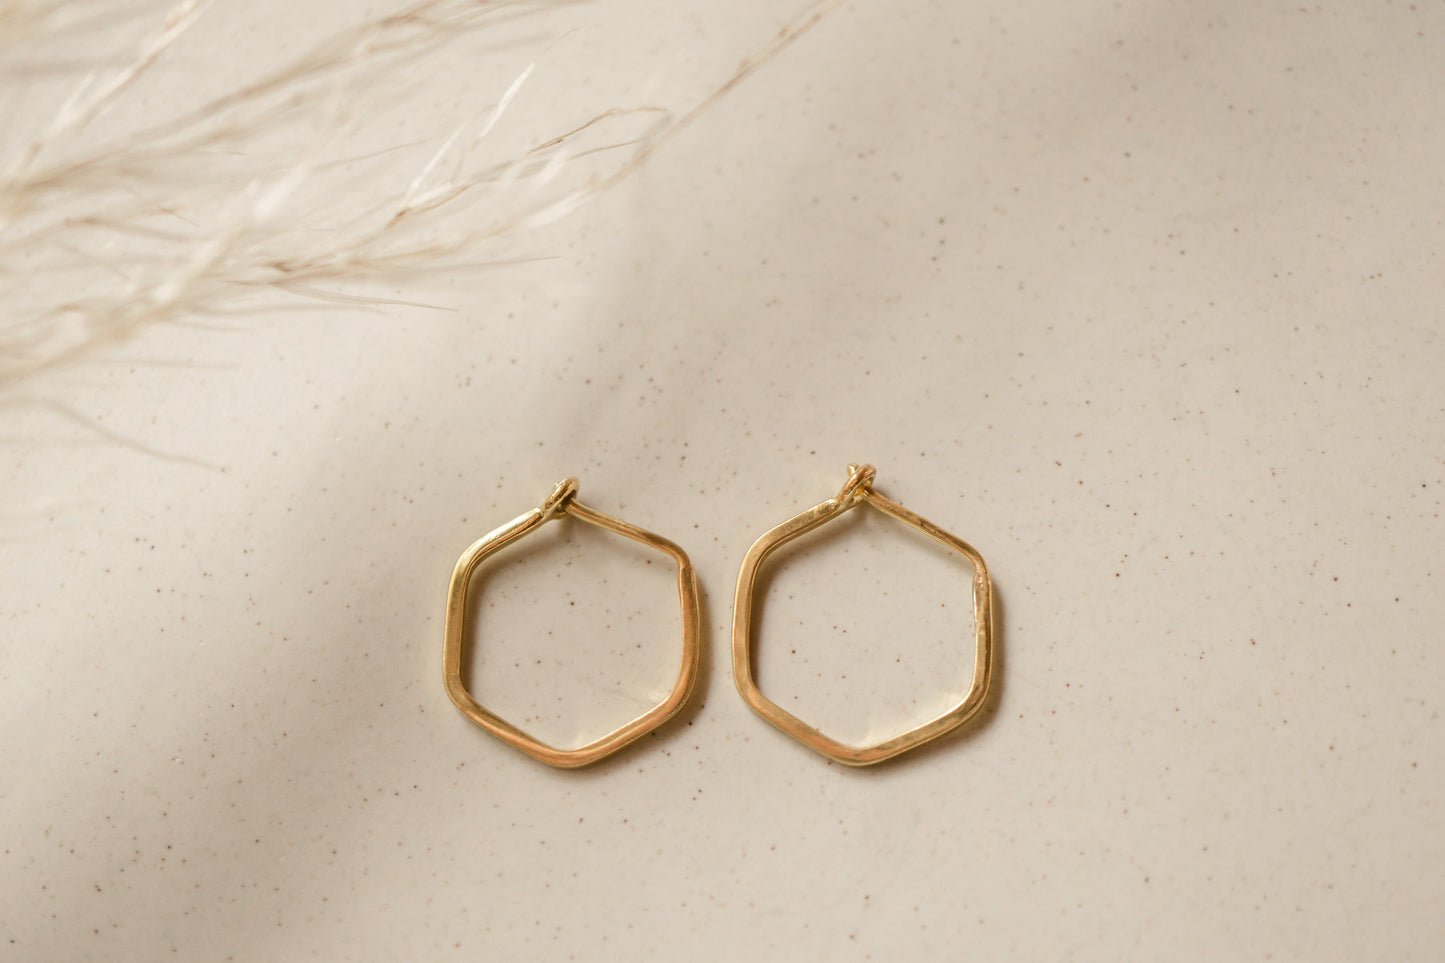 Honeycomb earrings - gold plated